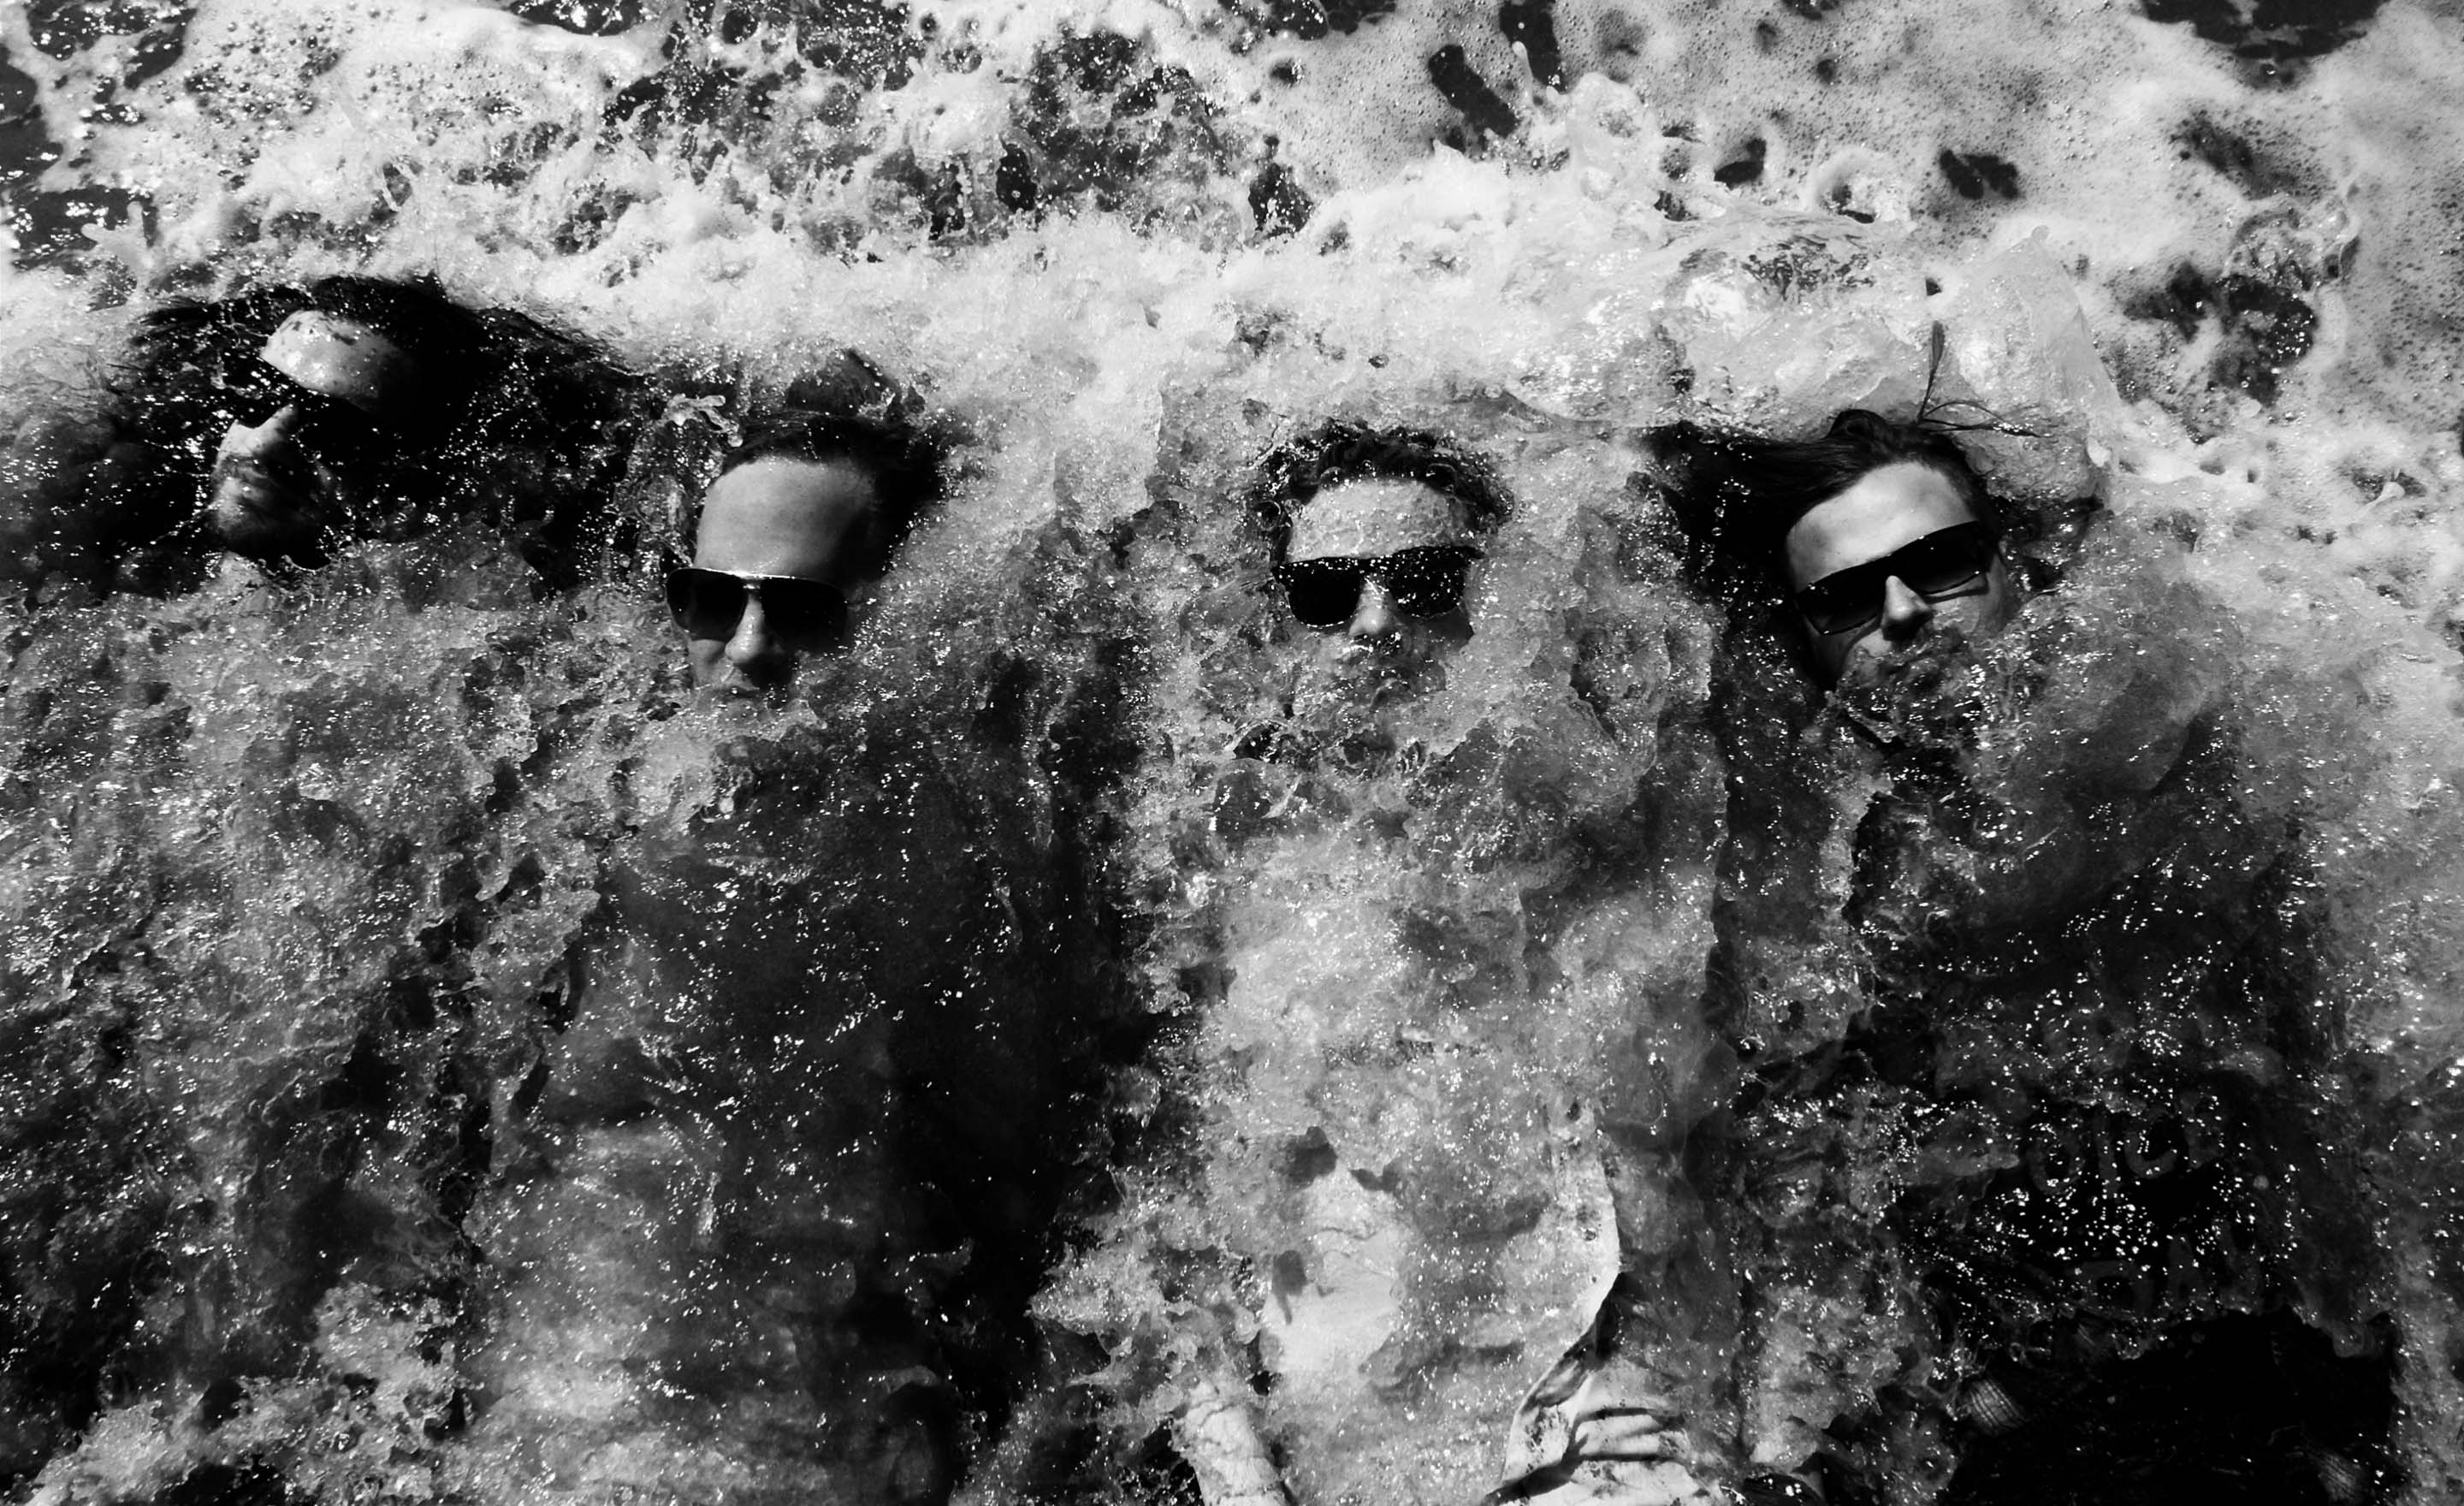 Black and white portrait Venice beach One Bad Son band members immersed in water while wearing sunglasses